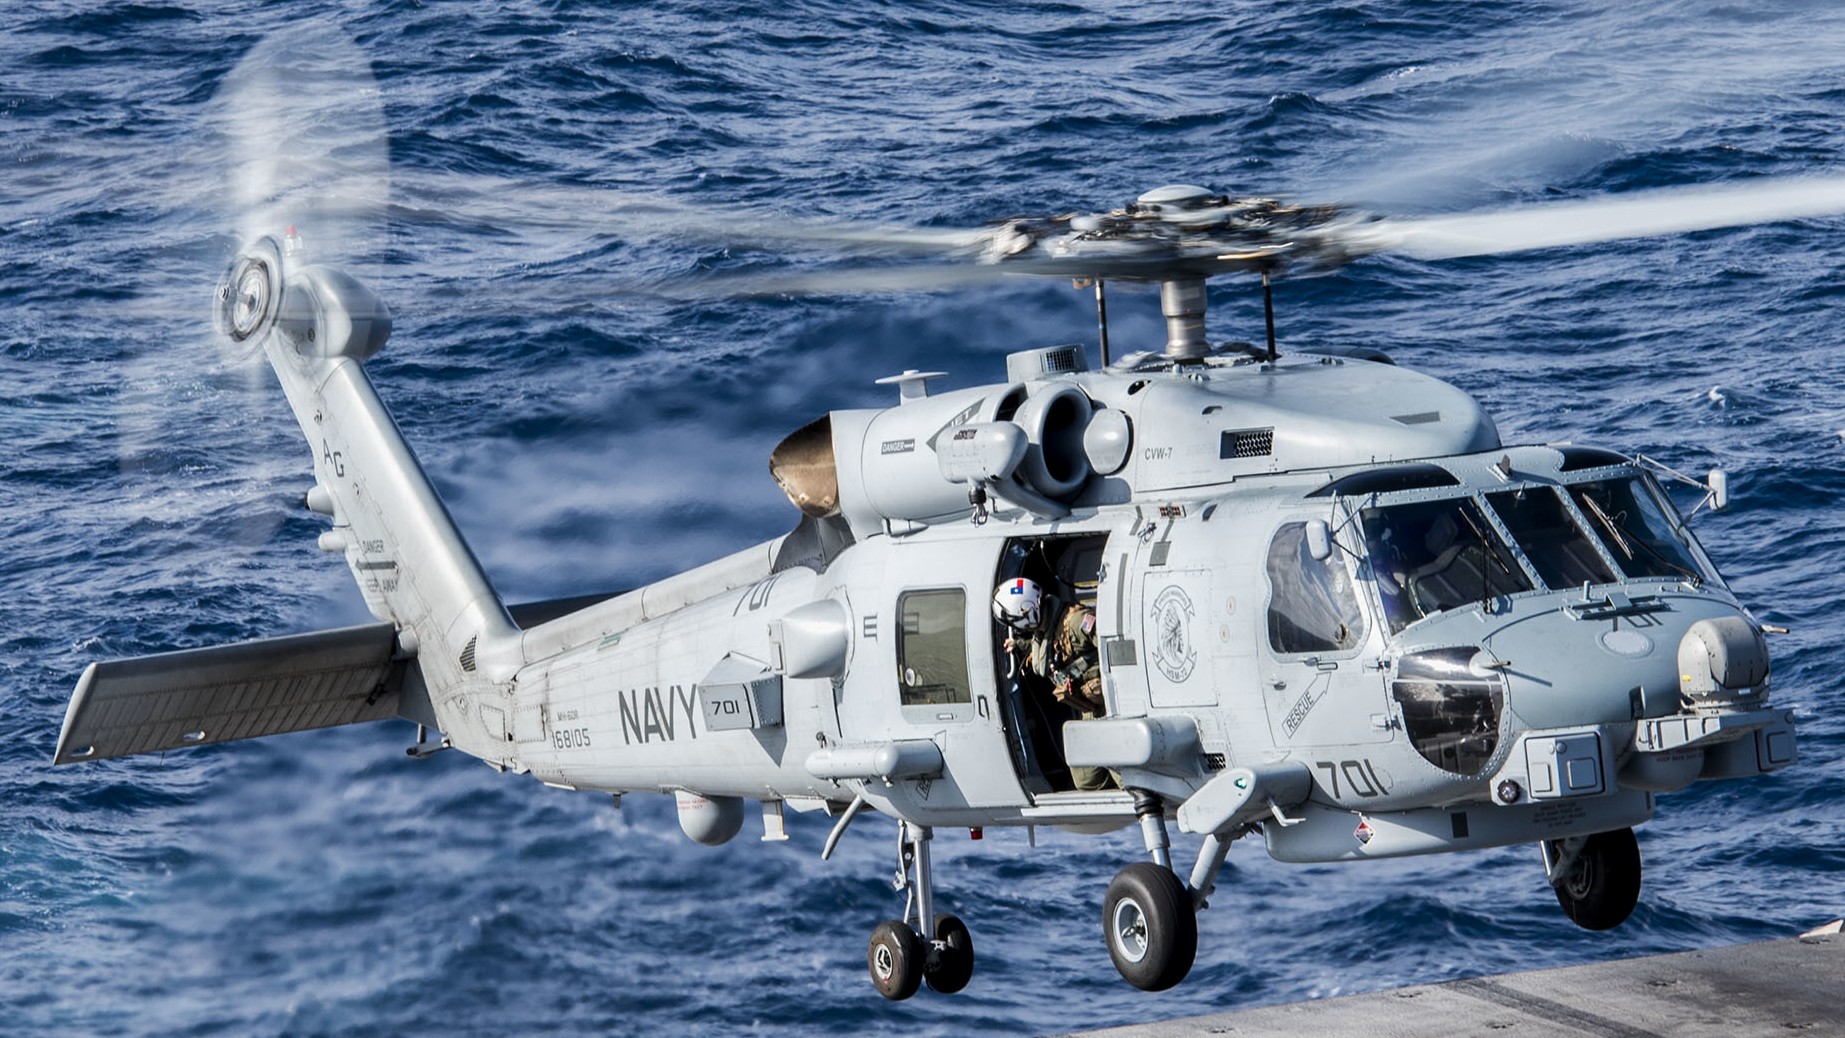 hsm-72 proud warriors helicopter maritime strike squadron mh-60r seahawk carrier air wing cvw-7 cvn-75 uss harry s. truman 2015